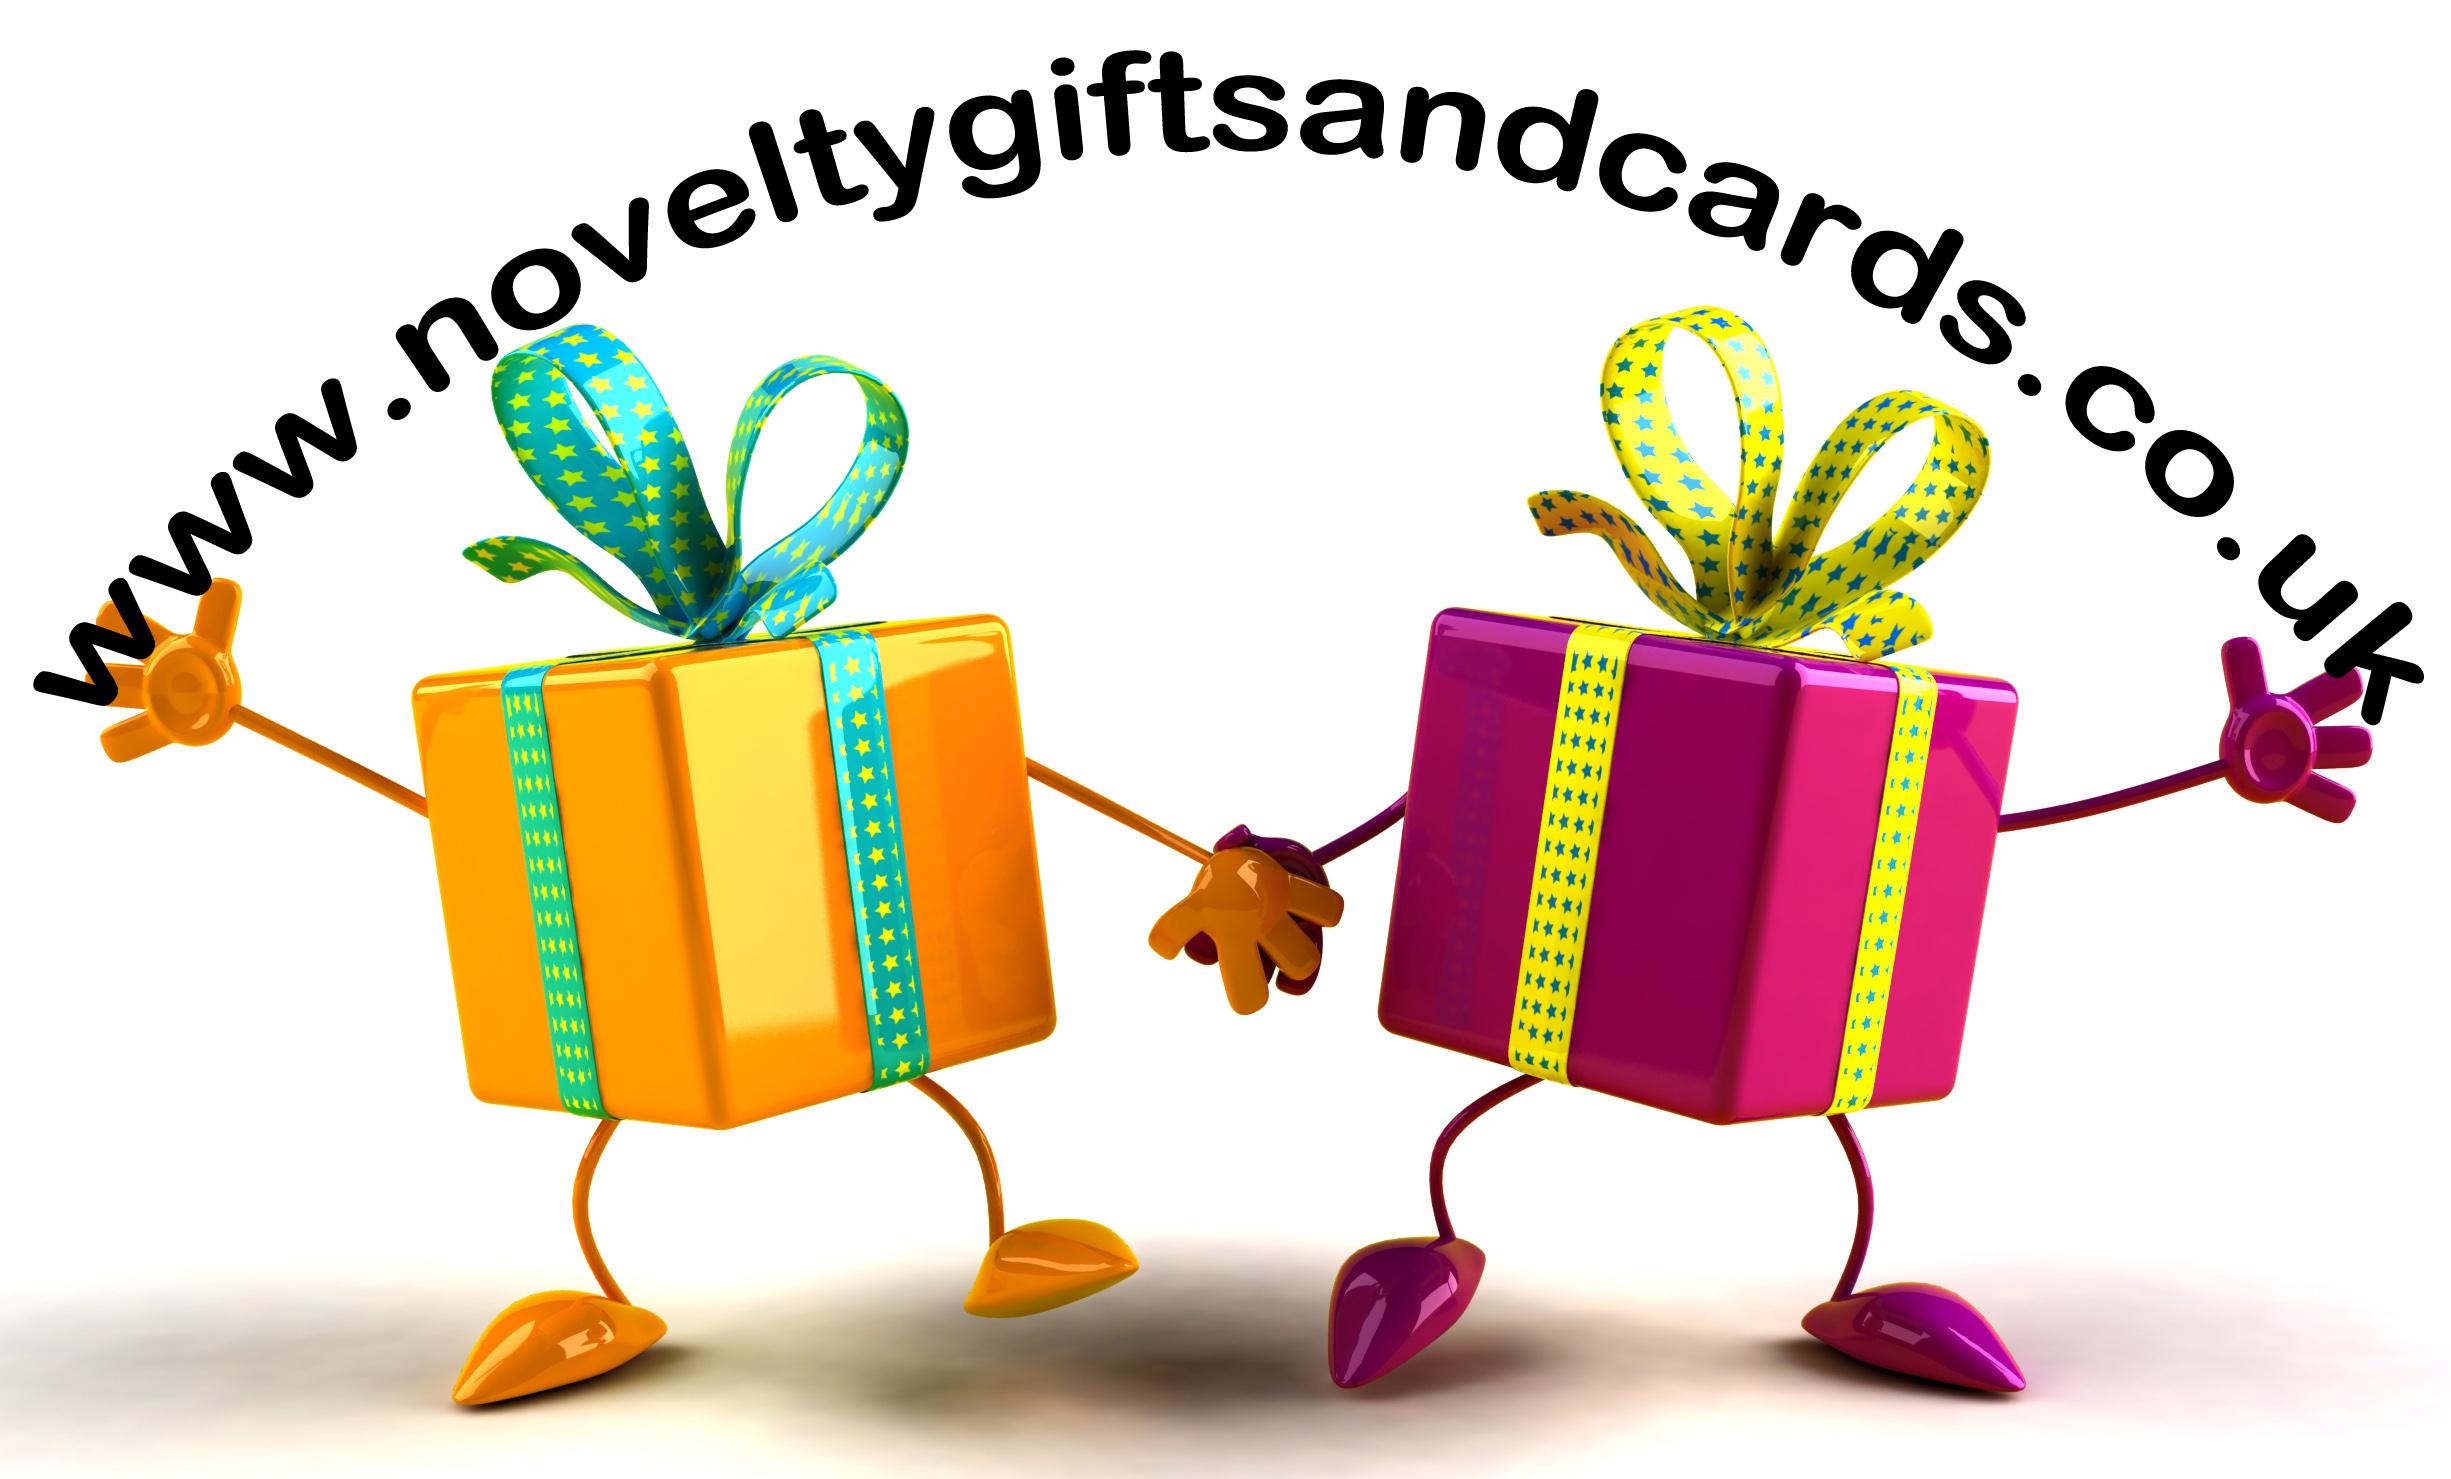 Novelty Gifts and Cards Logo